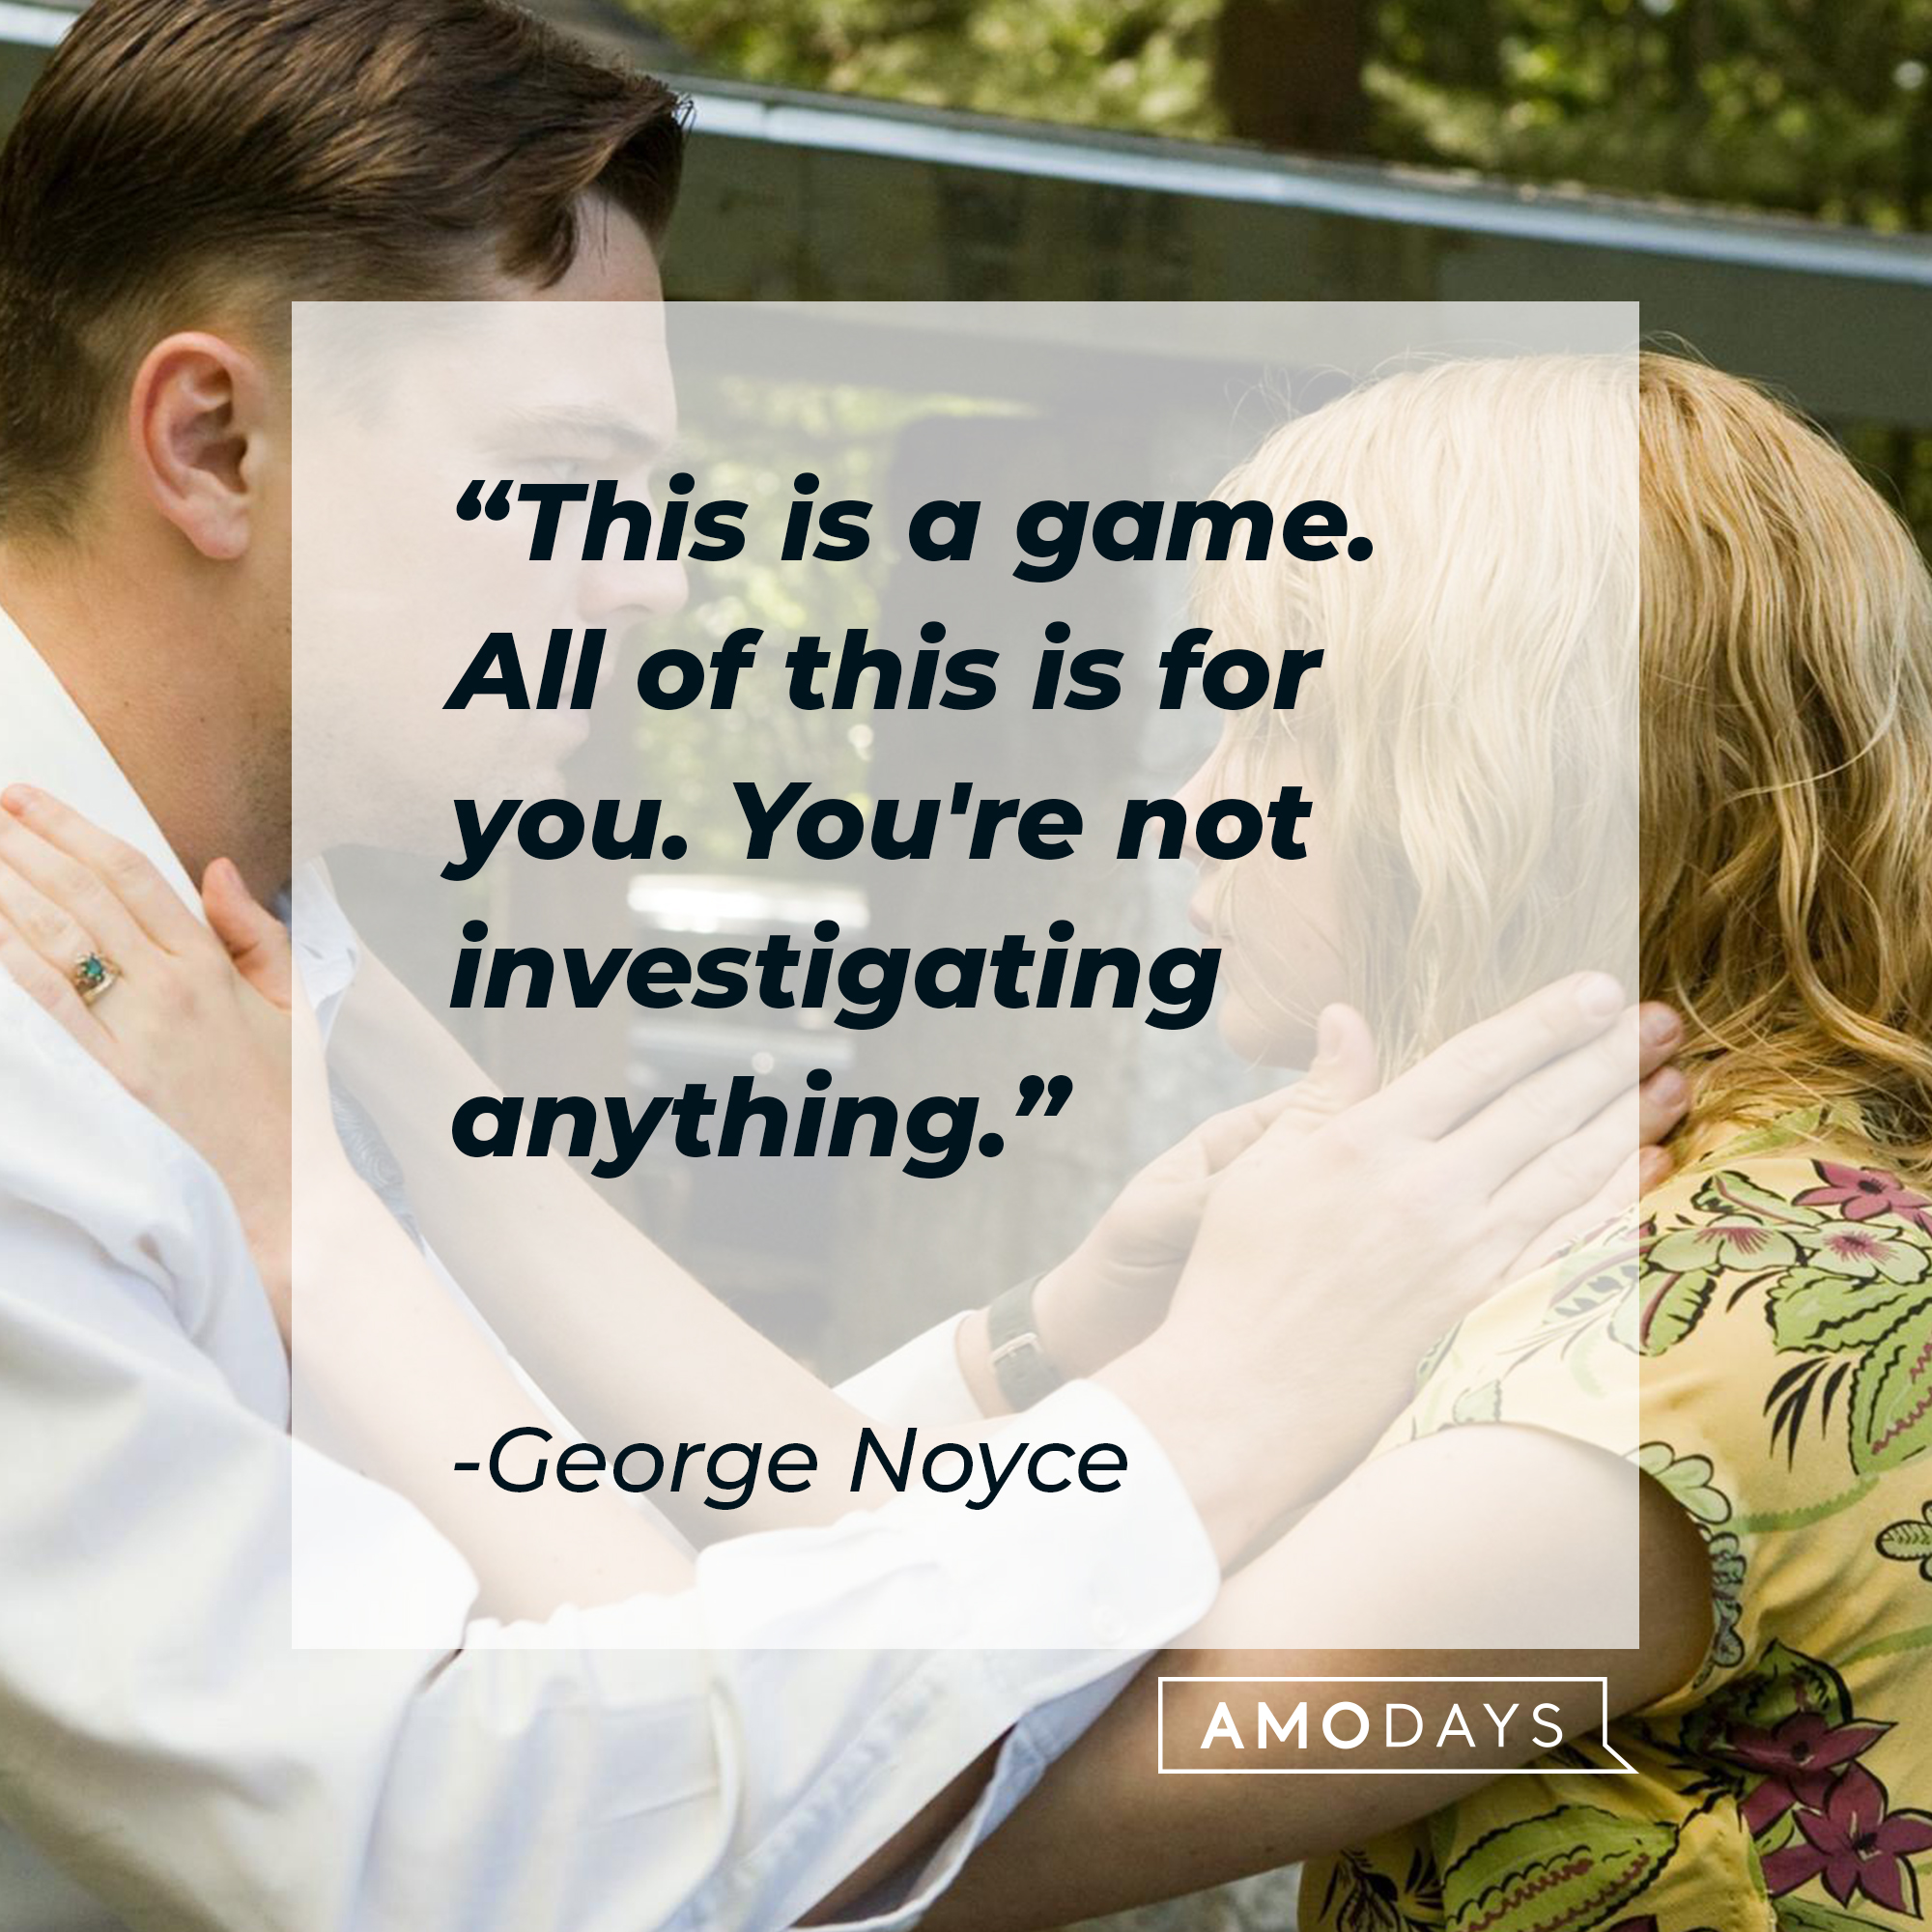 George Noyce's quote: "This is a game. All of this is for you. You're not investigating anything." | Source: facebook.com/ShutterIsland